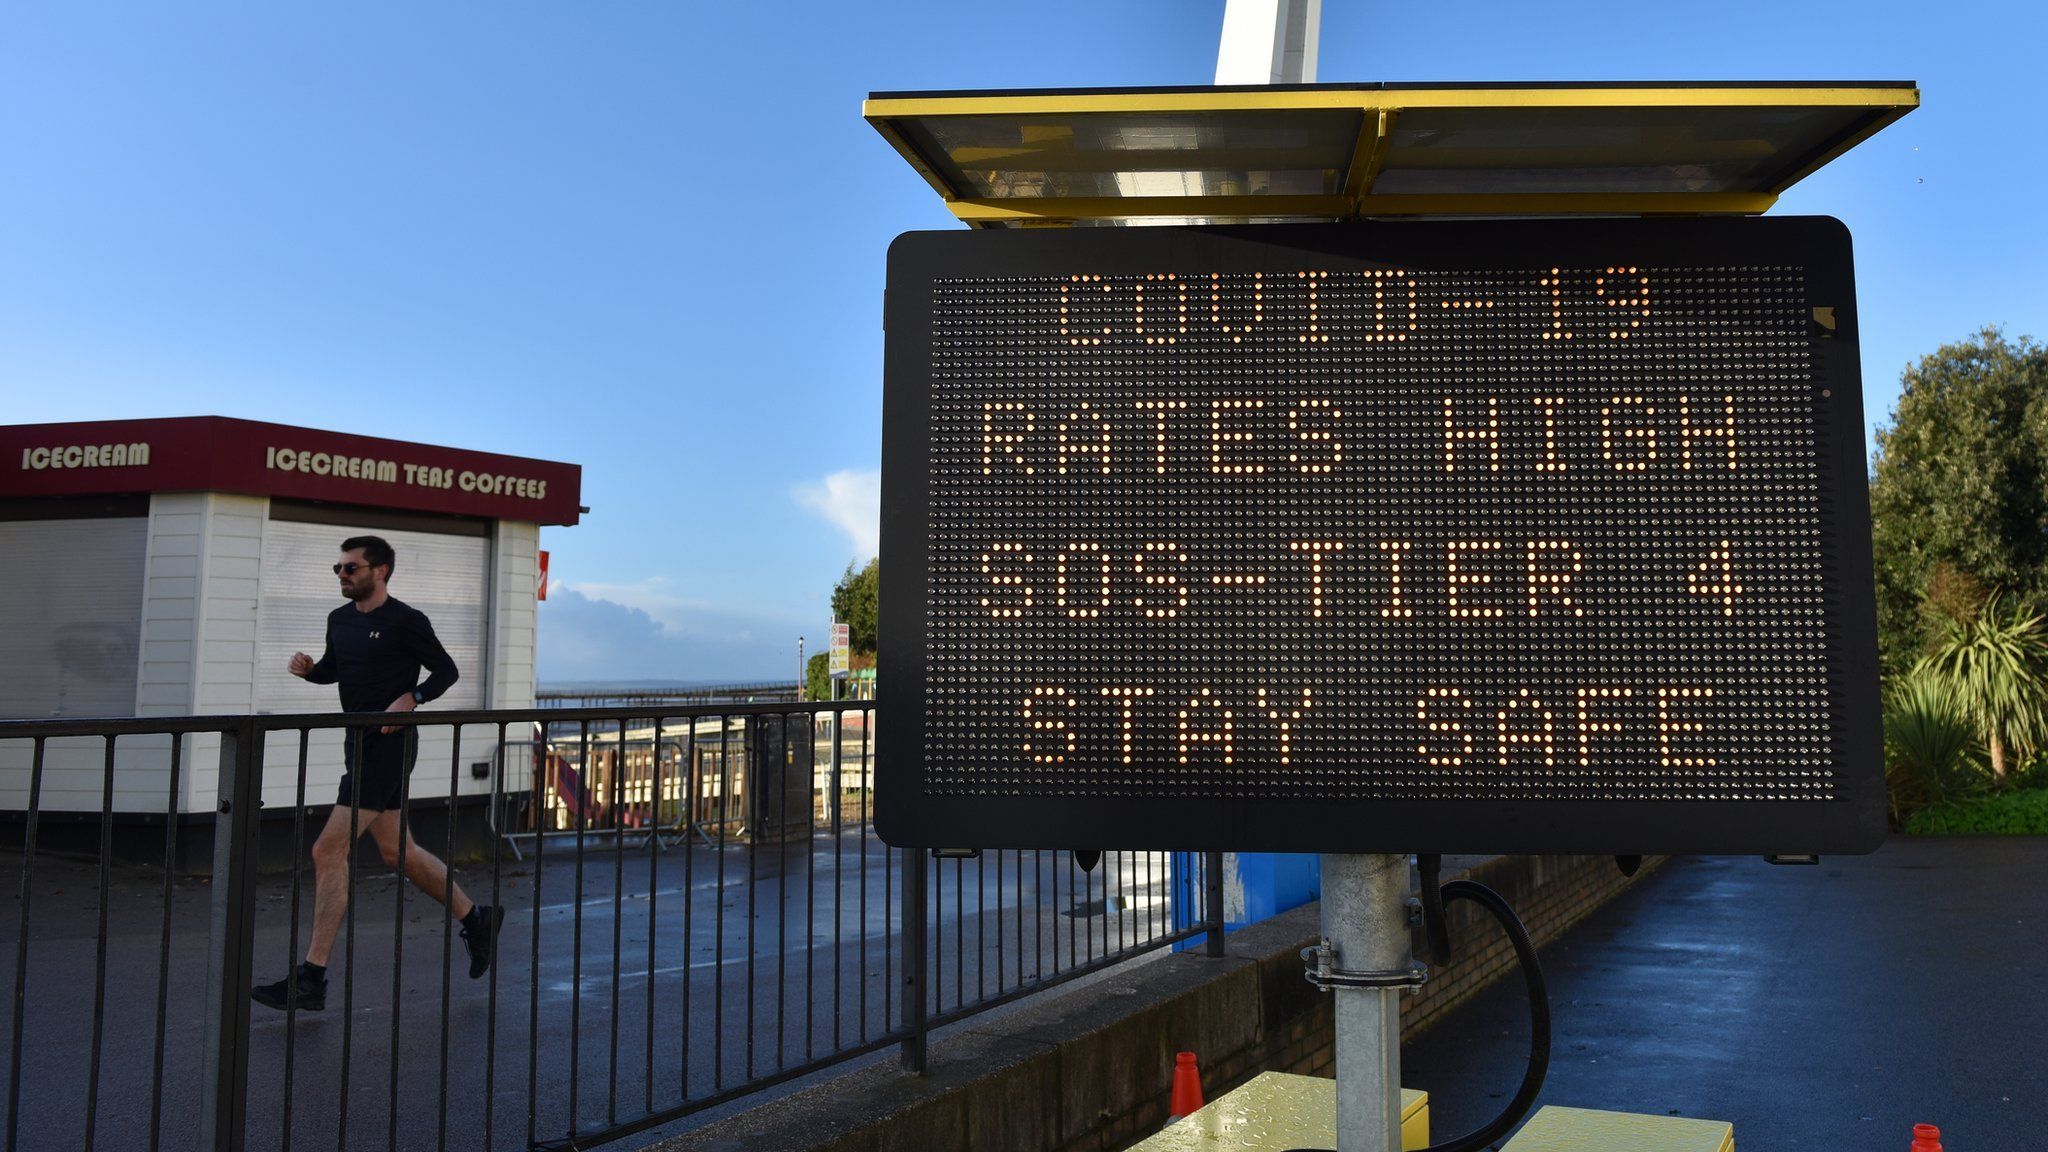 Sign warning of high case rates in Southend-on-Sea, Essex